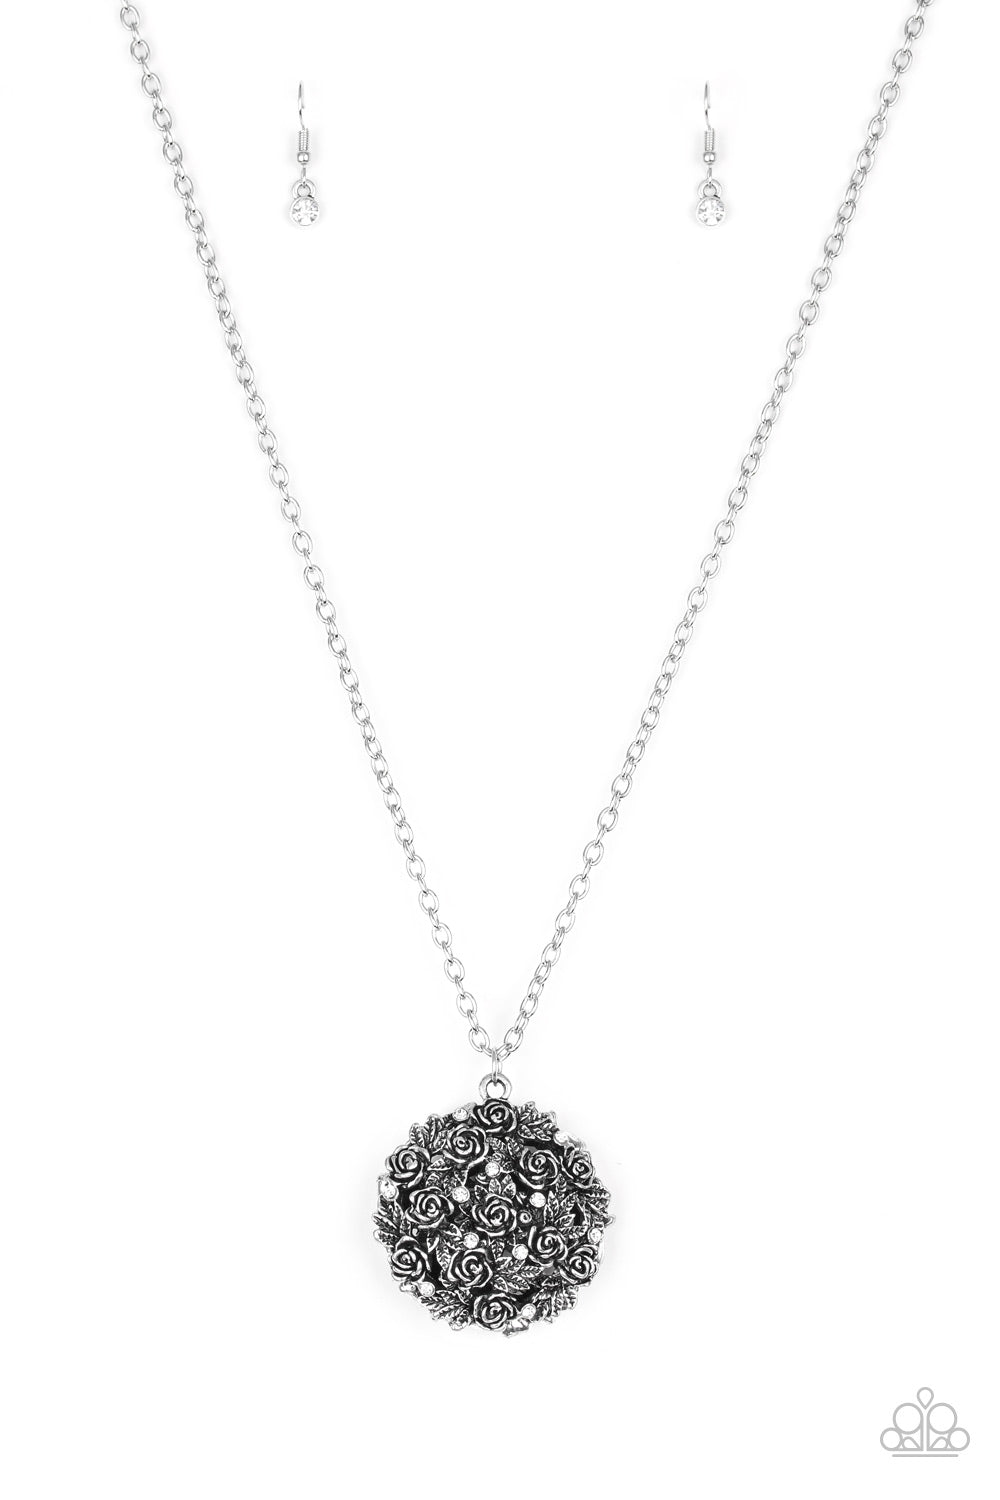 Royal In Roses - White rhinestones necklace